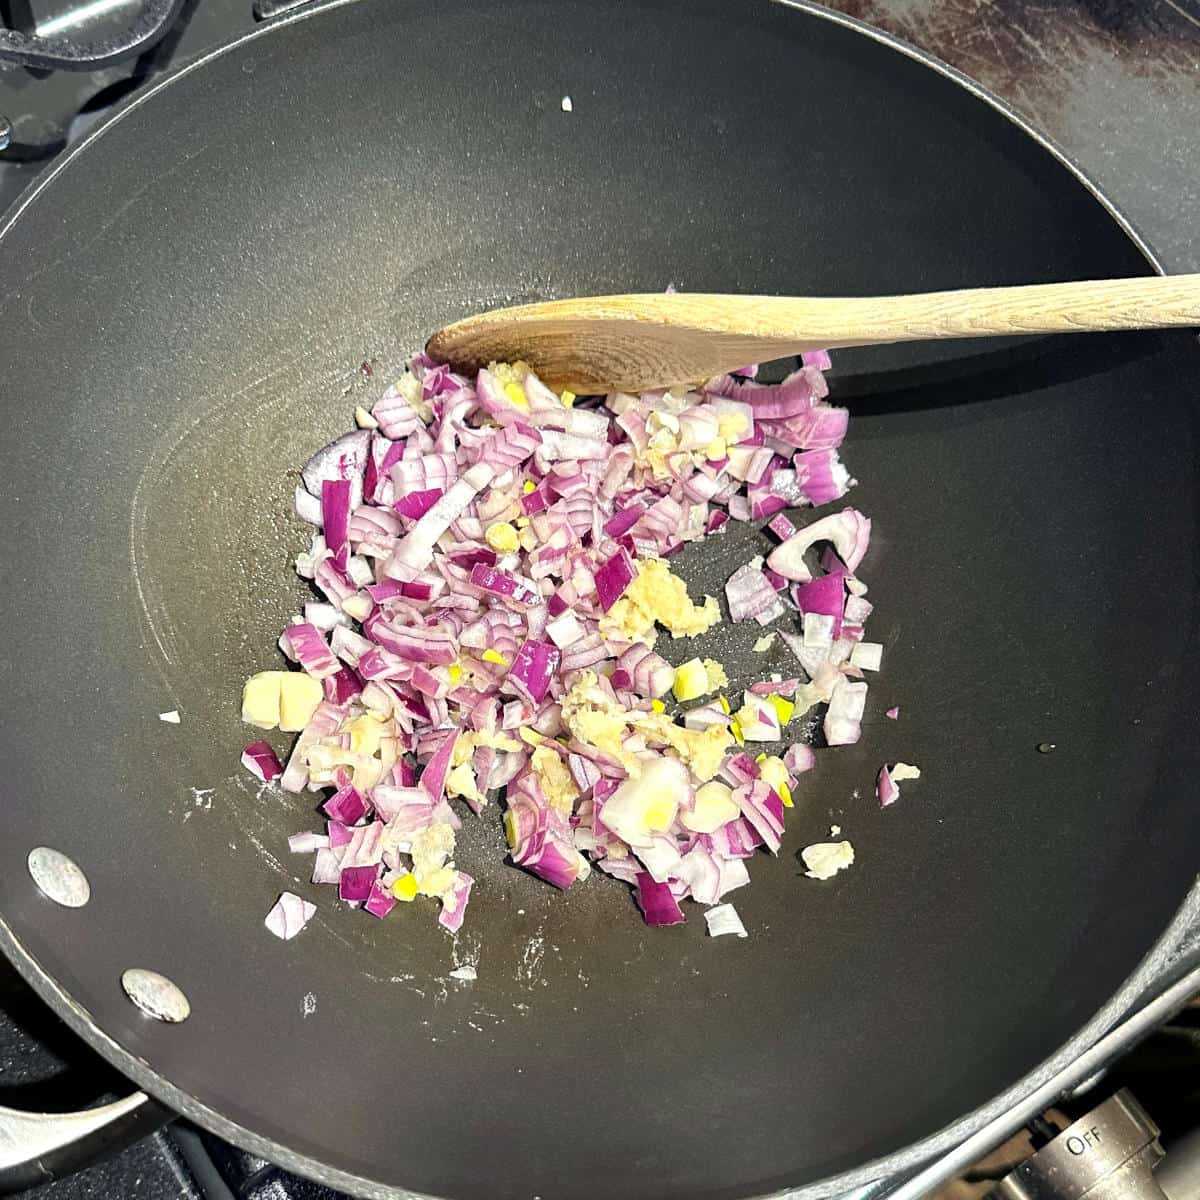 Garlic and onions sauteing in olive oil.